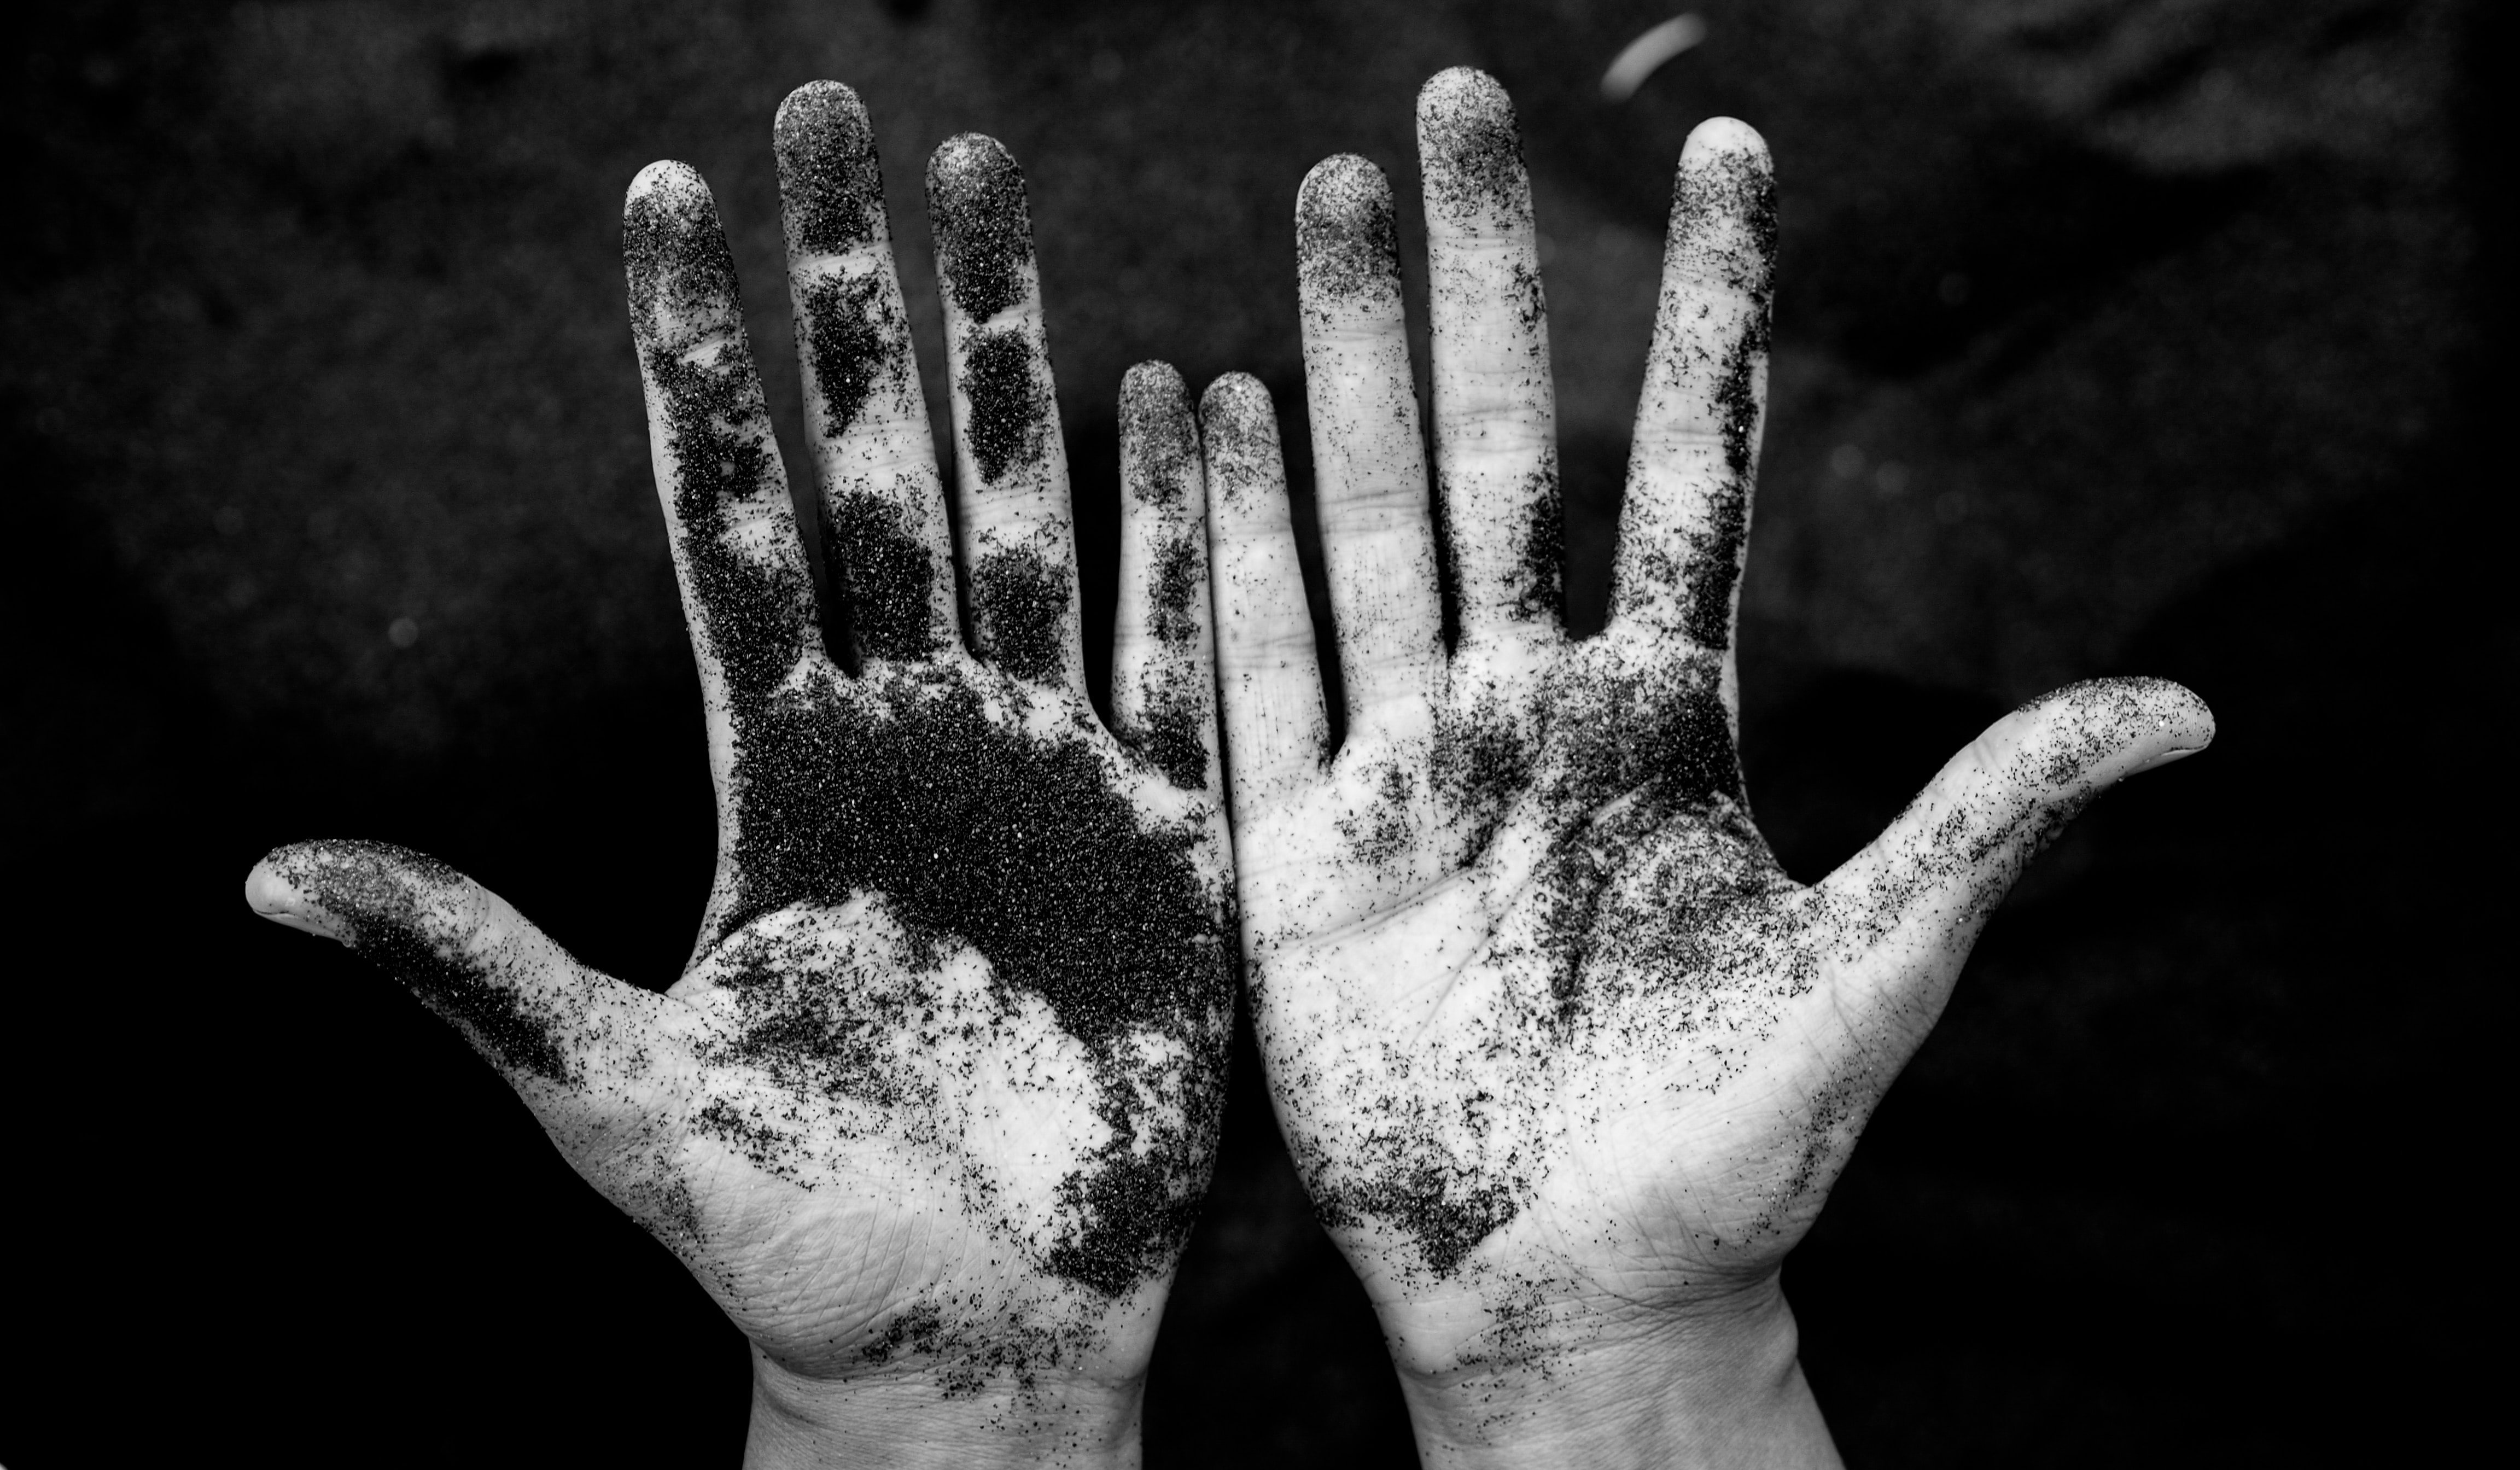 Hands with dirt